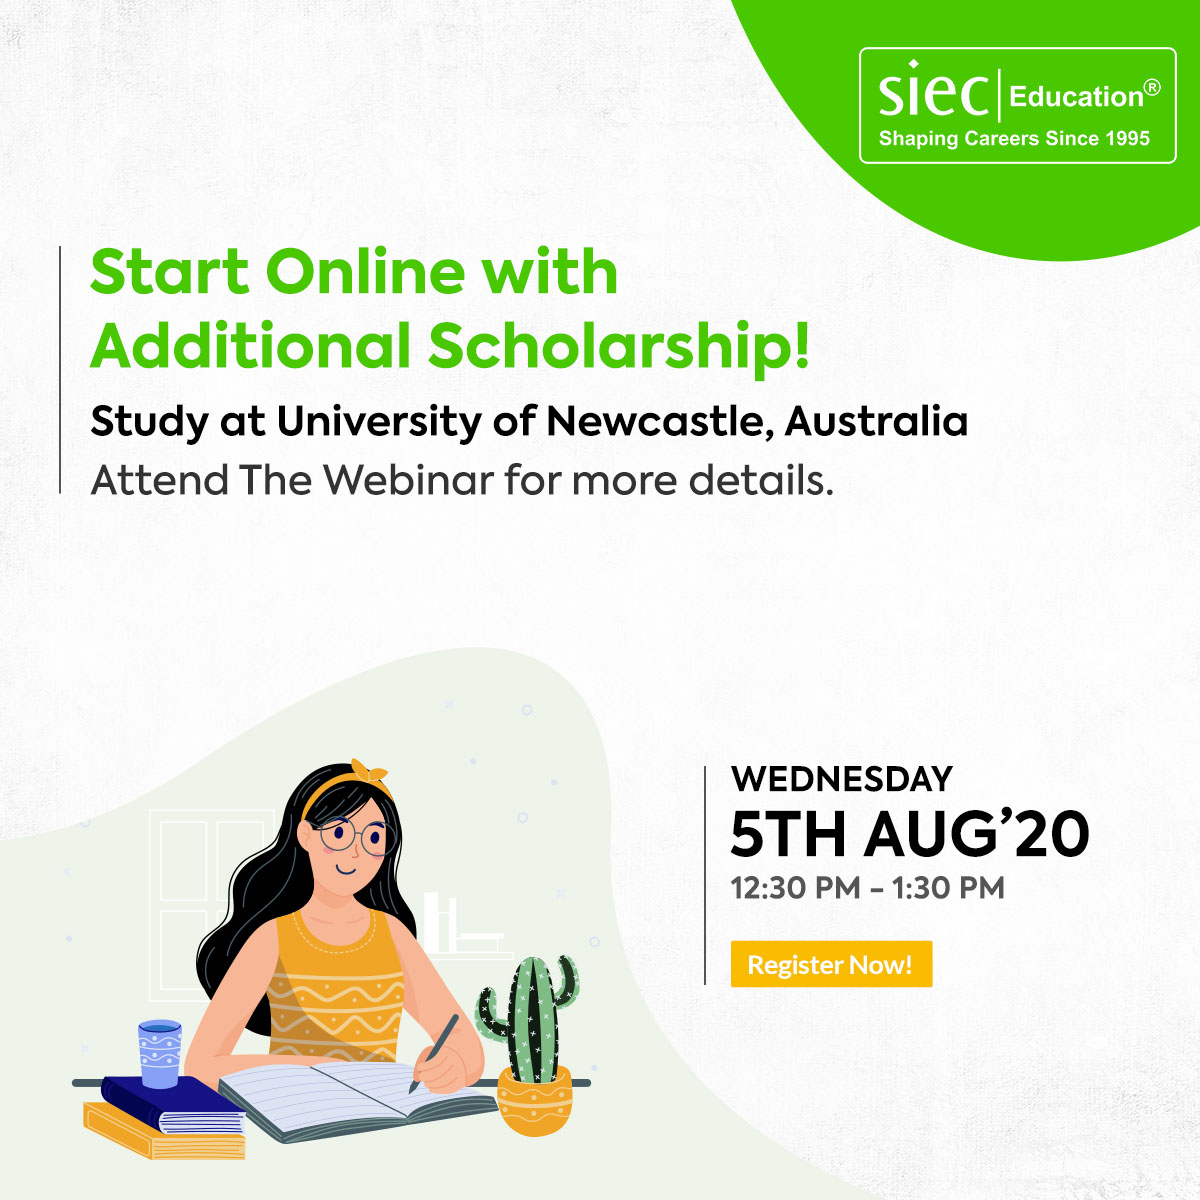 Study at University of Newcastle, Australia

Start Online with Additional Scholarship!

Attend The Webinar for more details.

Register Now: bit.ly/2Ezd7Gl
Call/WhatsApp: 9779046382

#studyinaustralia #australiastudentvisa #universityofnewcastle #scholarships